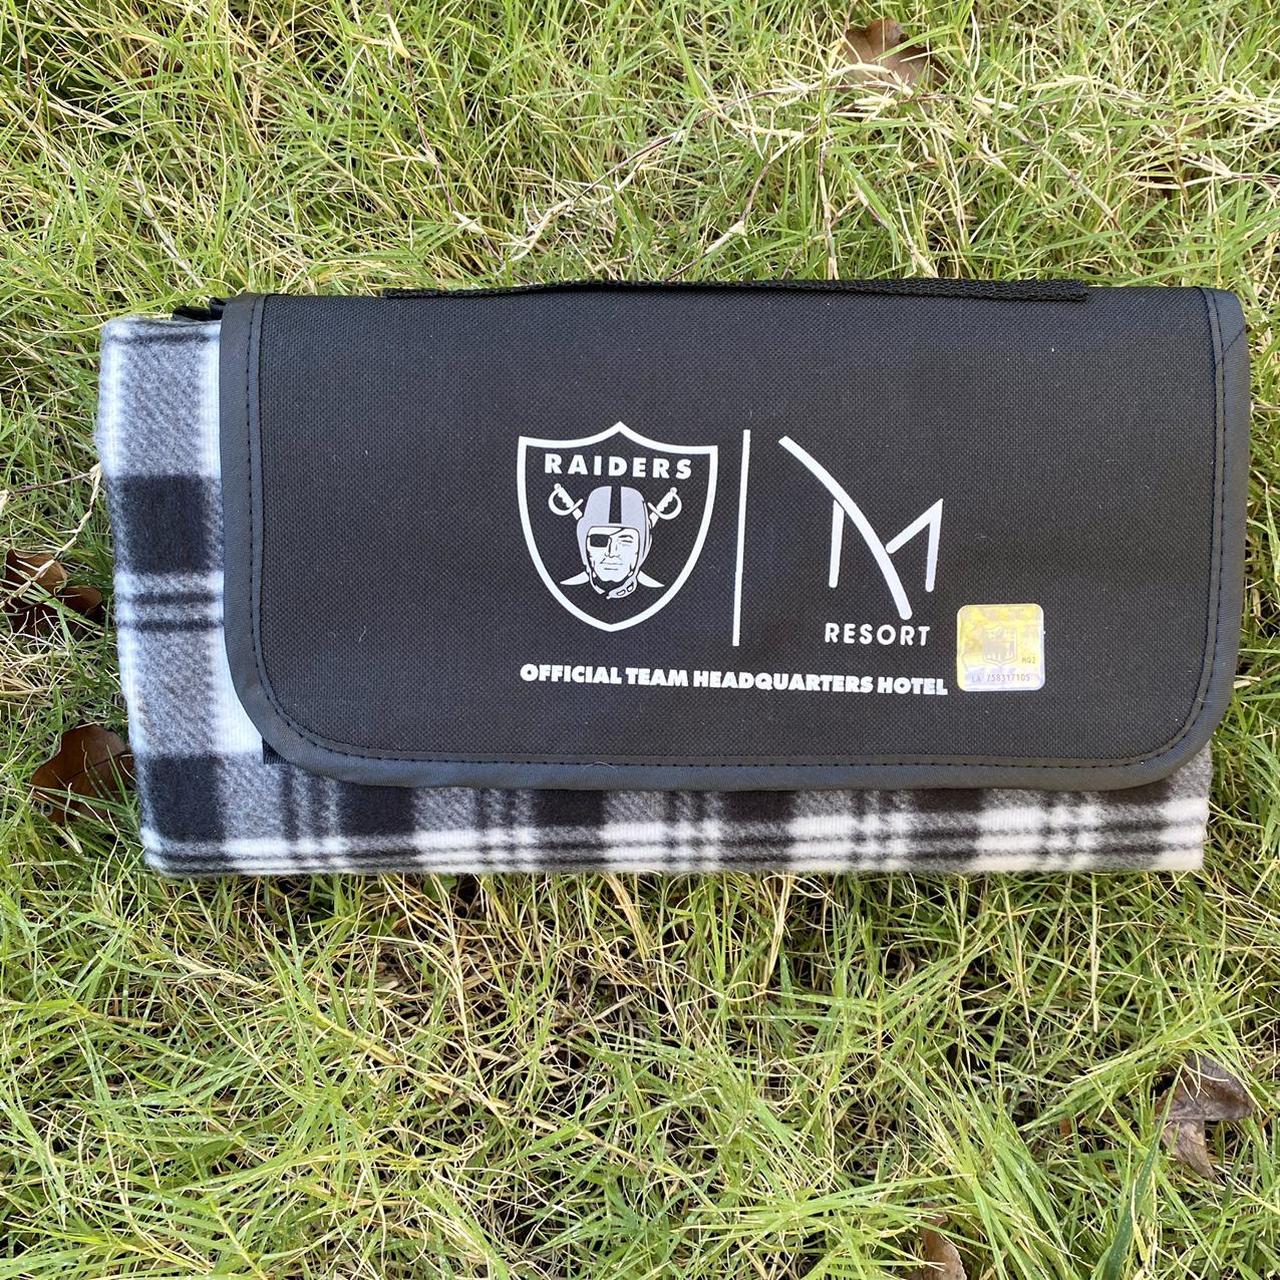 Product Image 4 - NFL Raiders Checkered Outdoor Blanket.